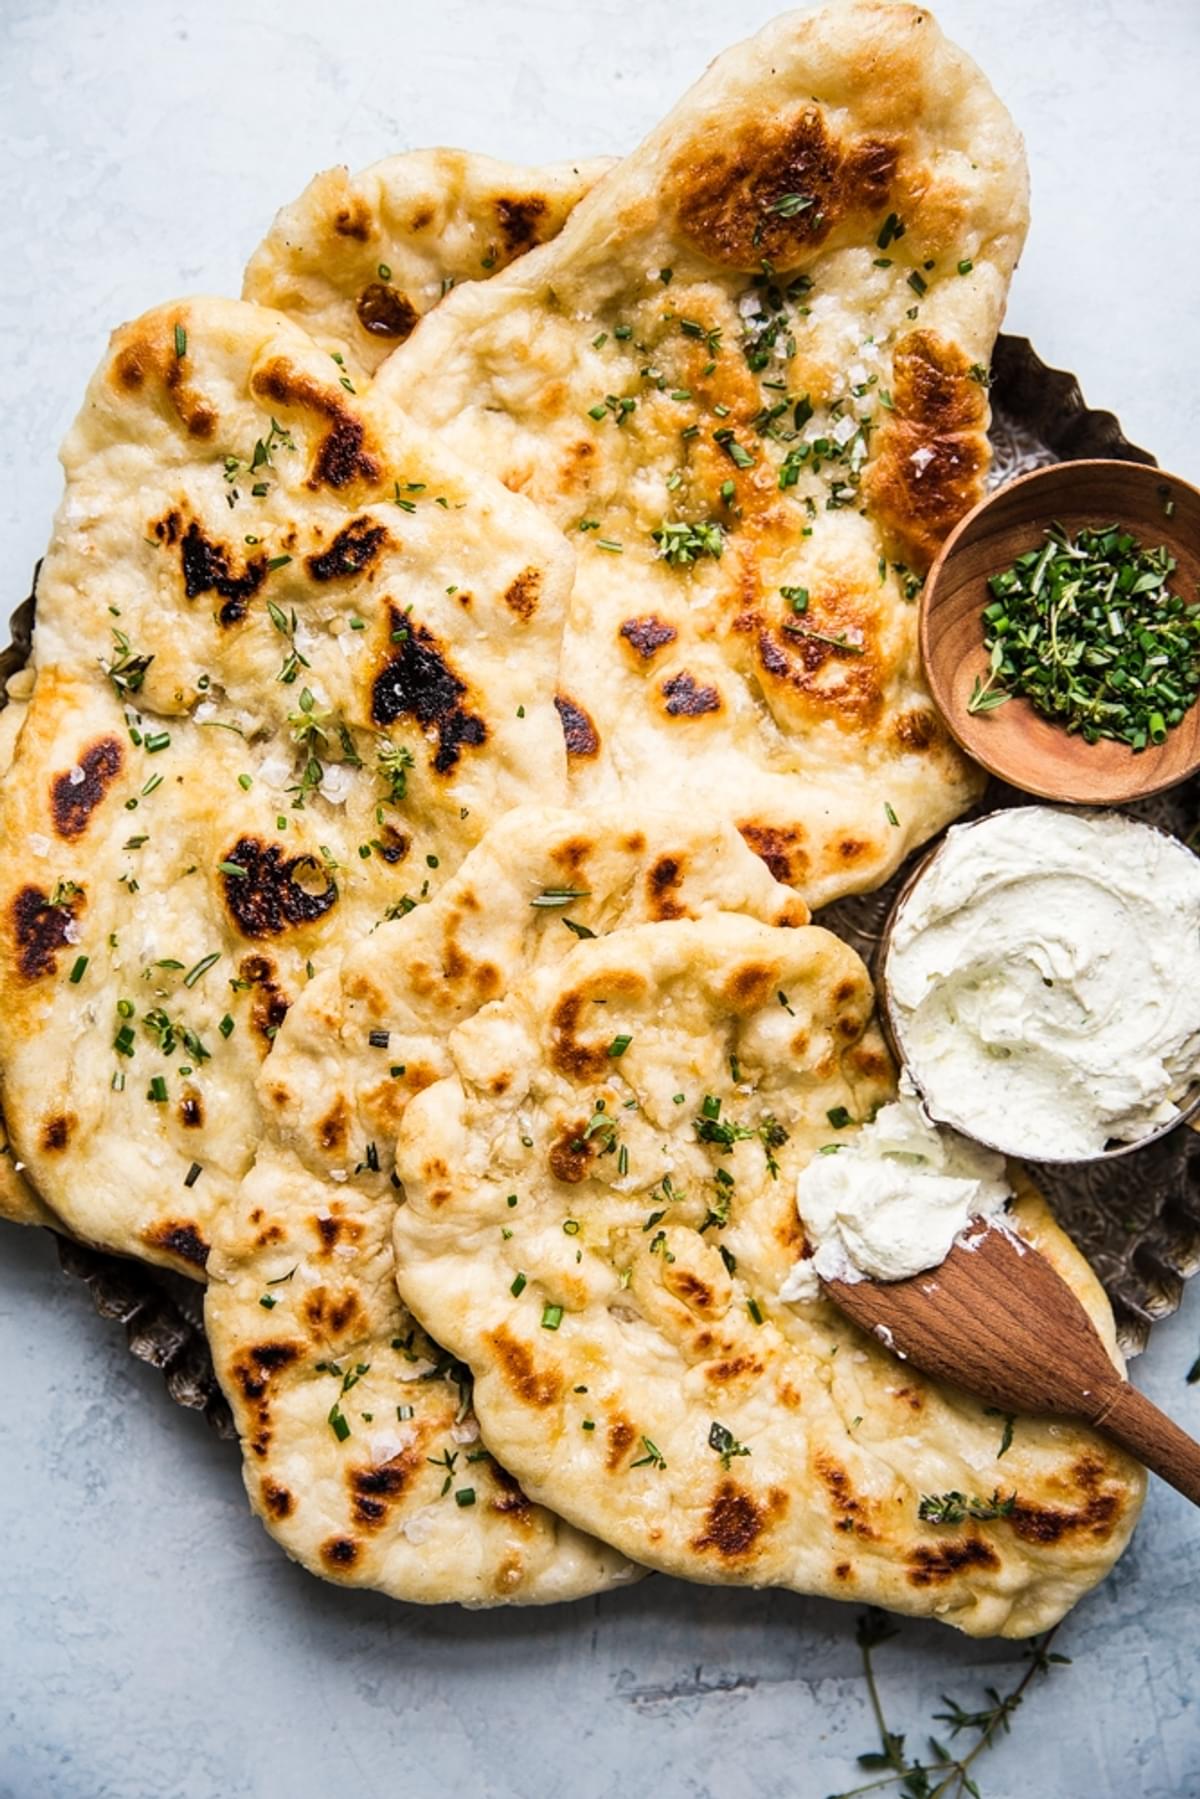 Herbed homemade flat bread with whipped feta cheese spread on a serving plate